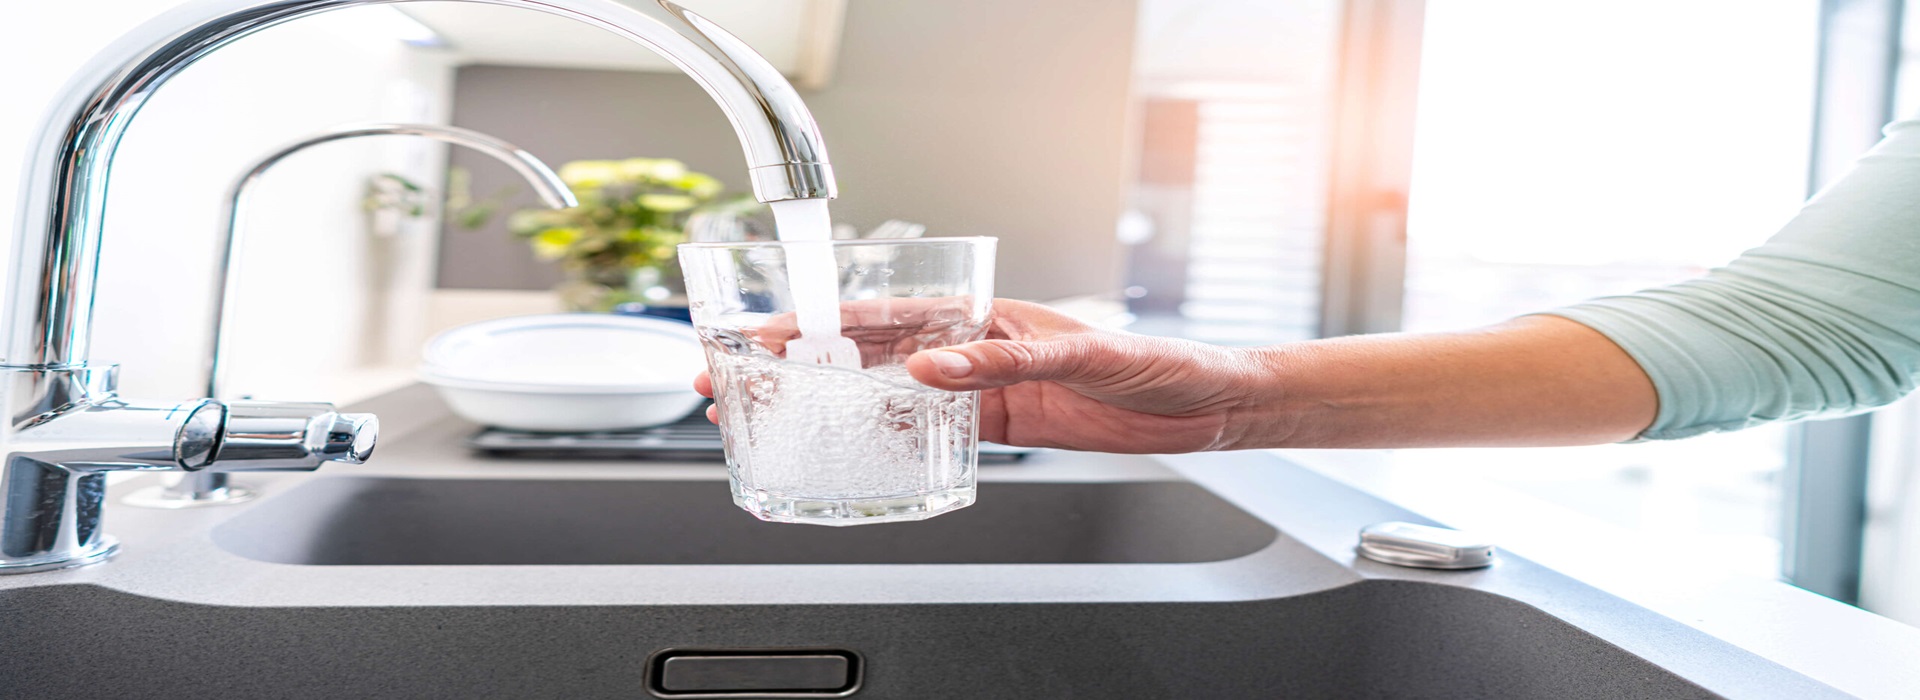 Filling a glass with water from a kitchen faucet connected to a water softener system.